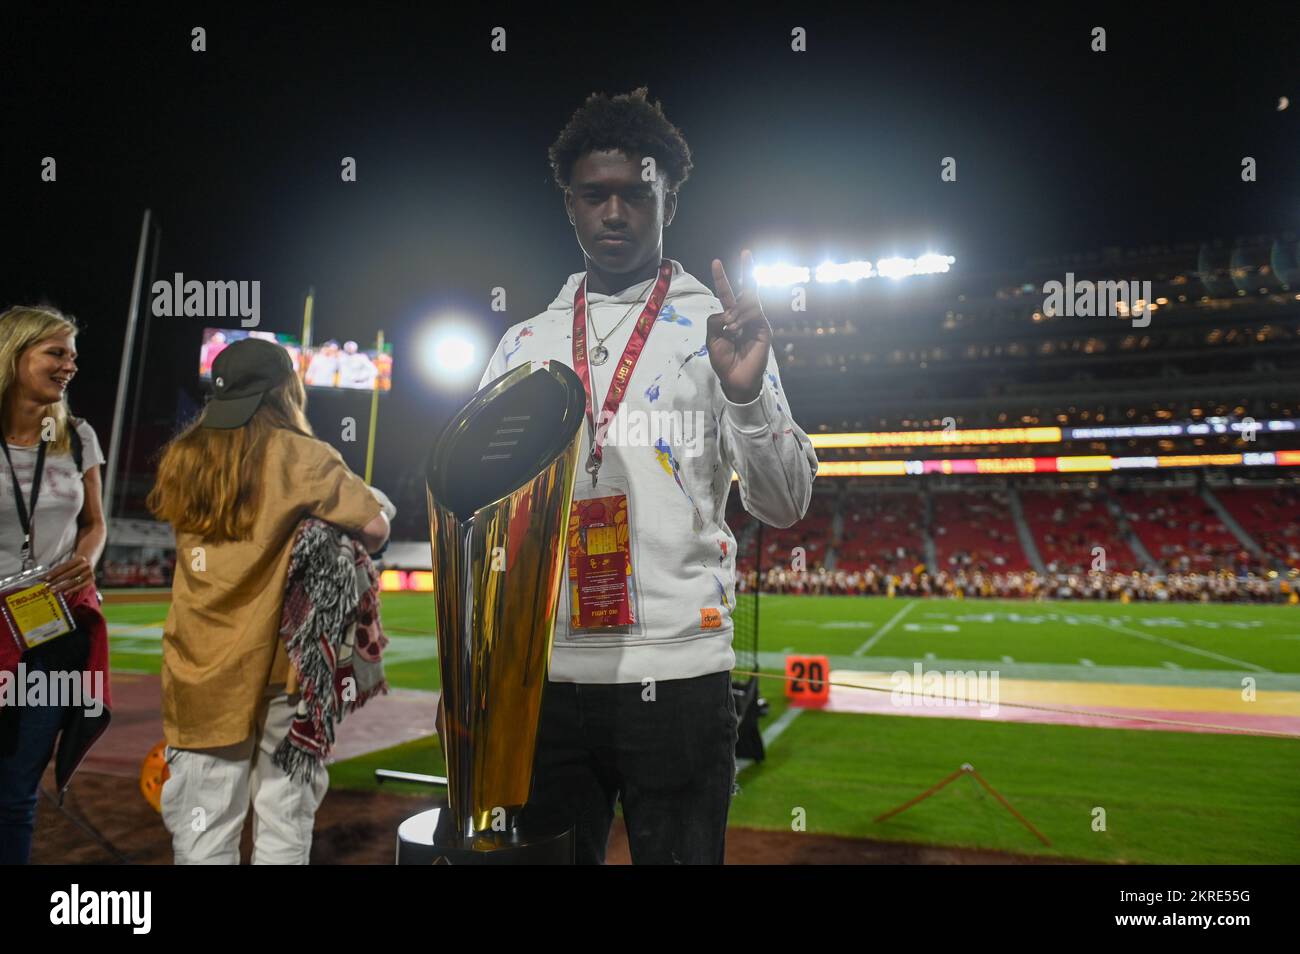 Serra high school cornerback Rodrick Pleasant poses with the College Football Playoff National Championship trophy during an NCAA football game betwee Stock Photo